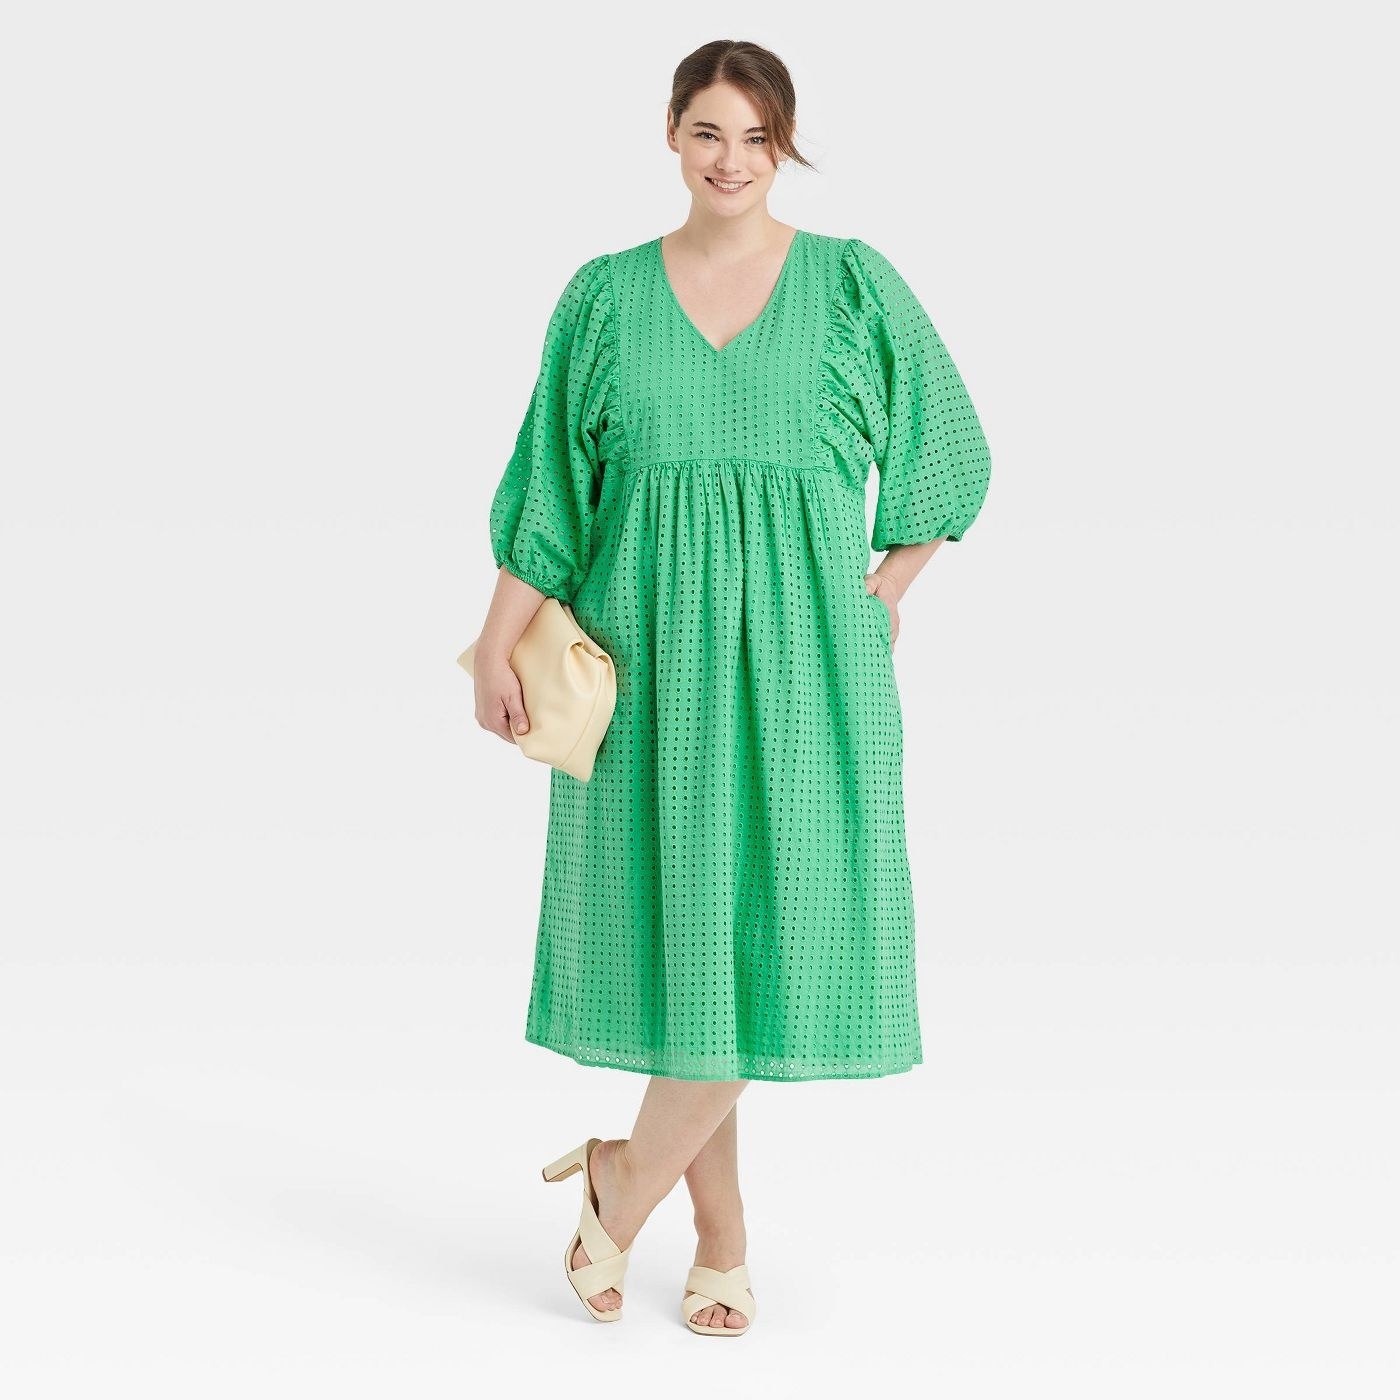 Model wearing green dress with white shoes